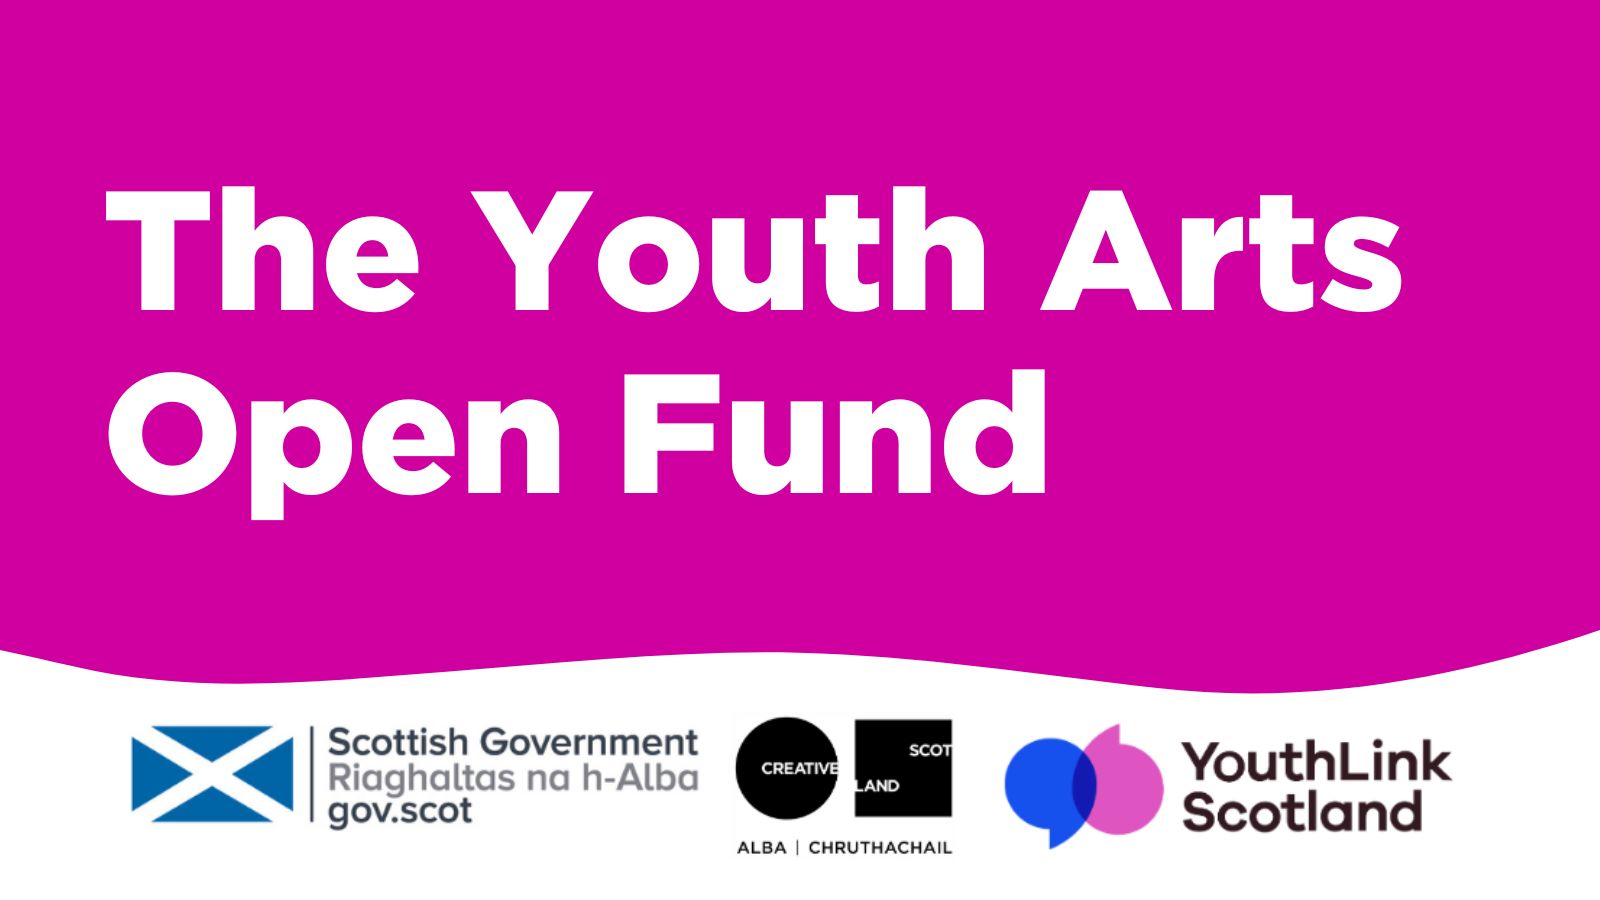 The Youth Arts Open Fund